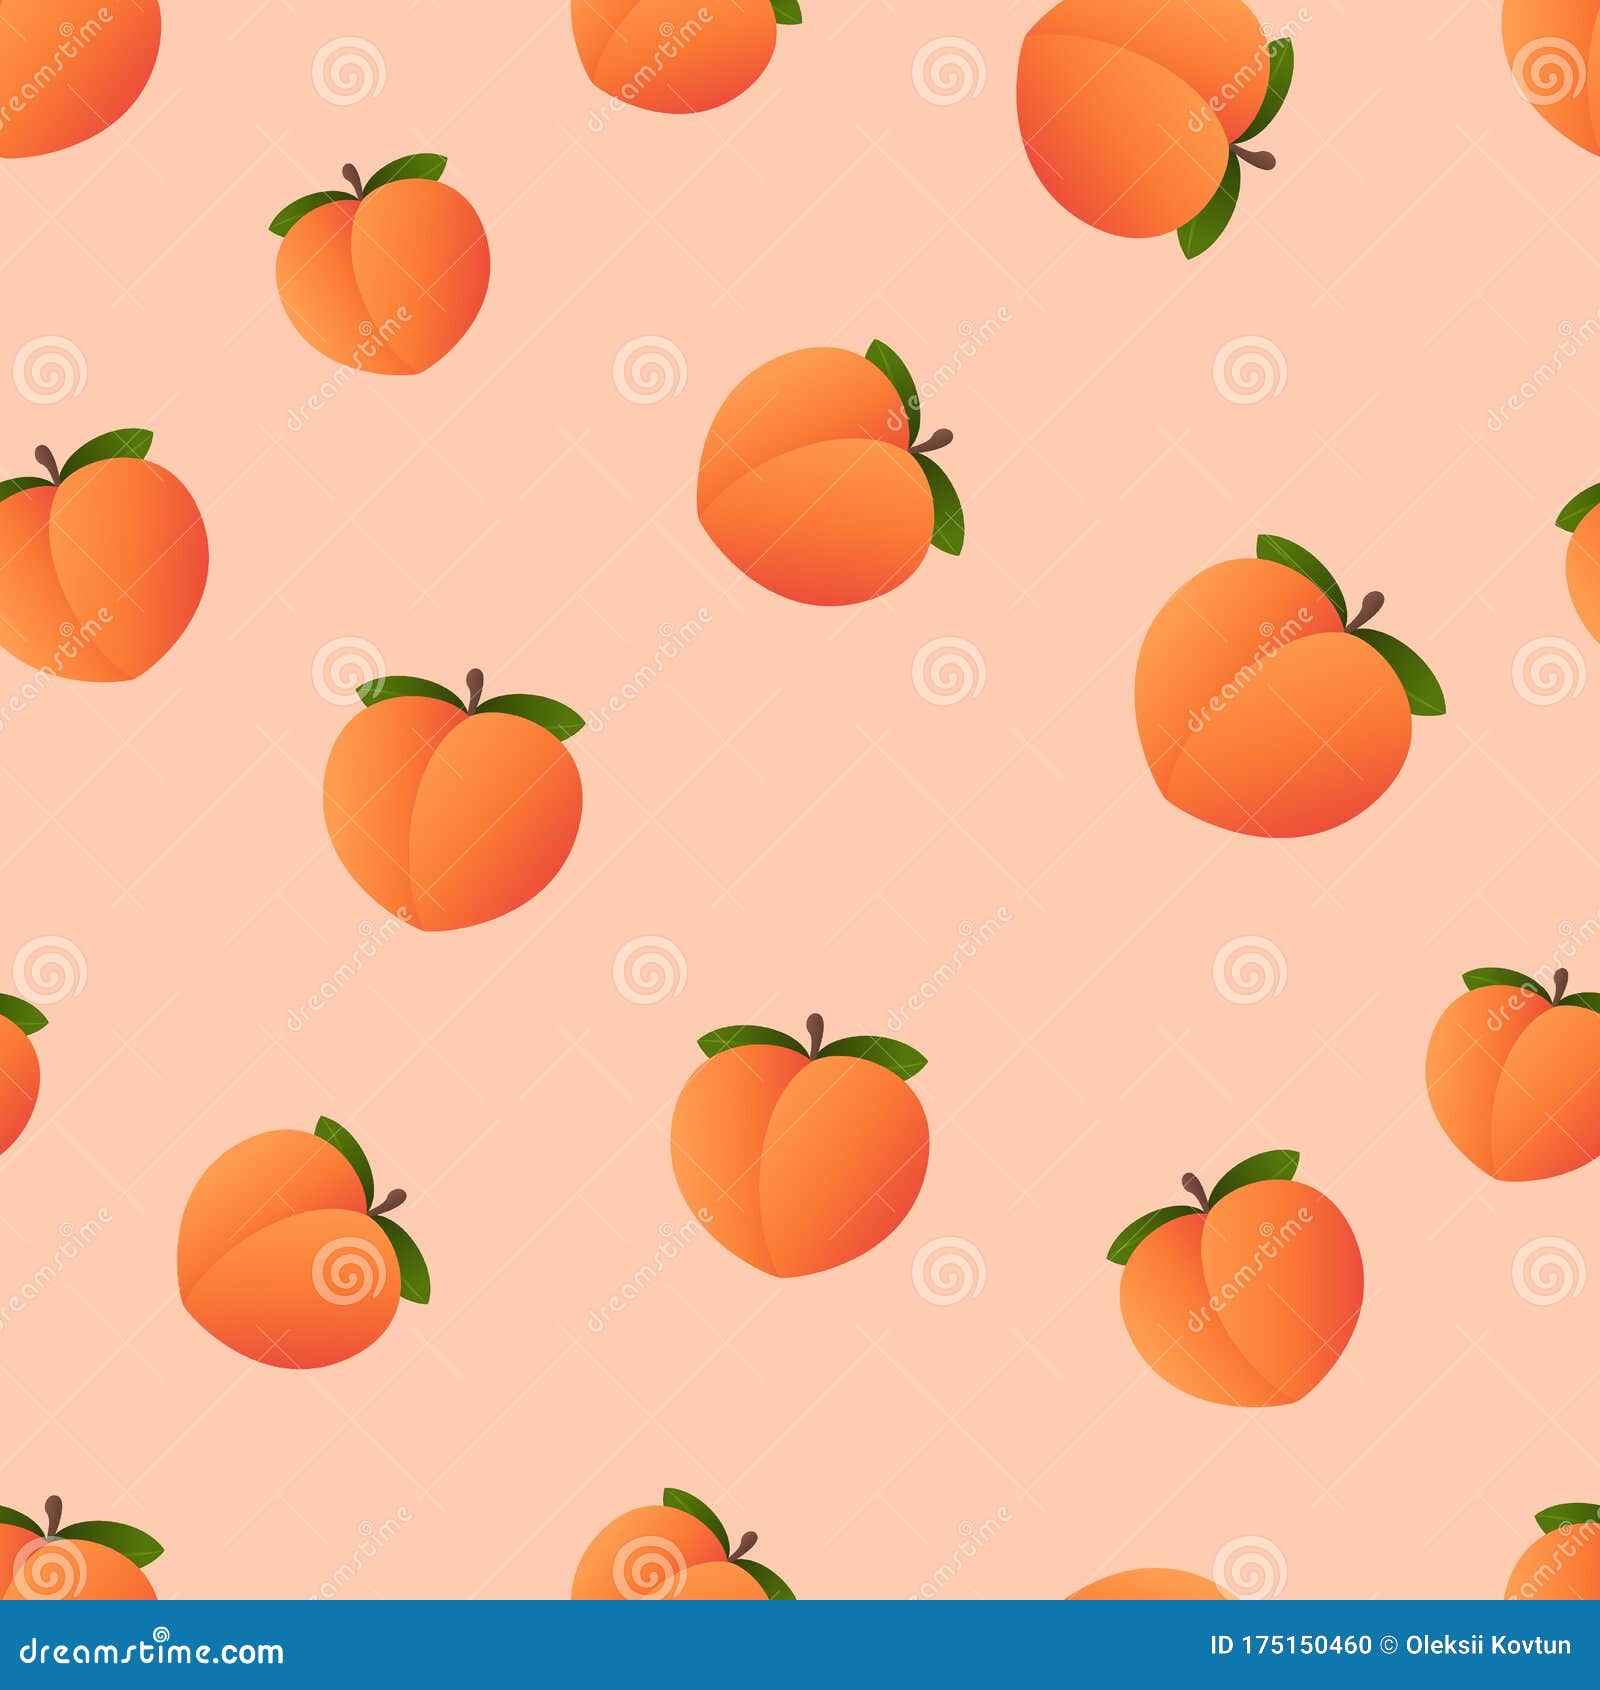 Peaches fruit background mountain of peaches ripe fruits background  with peaches HD wallpaper  Peakpx